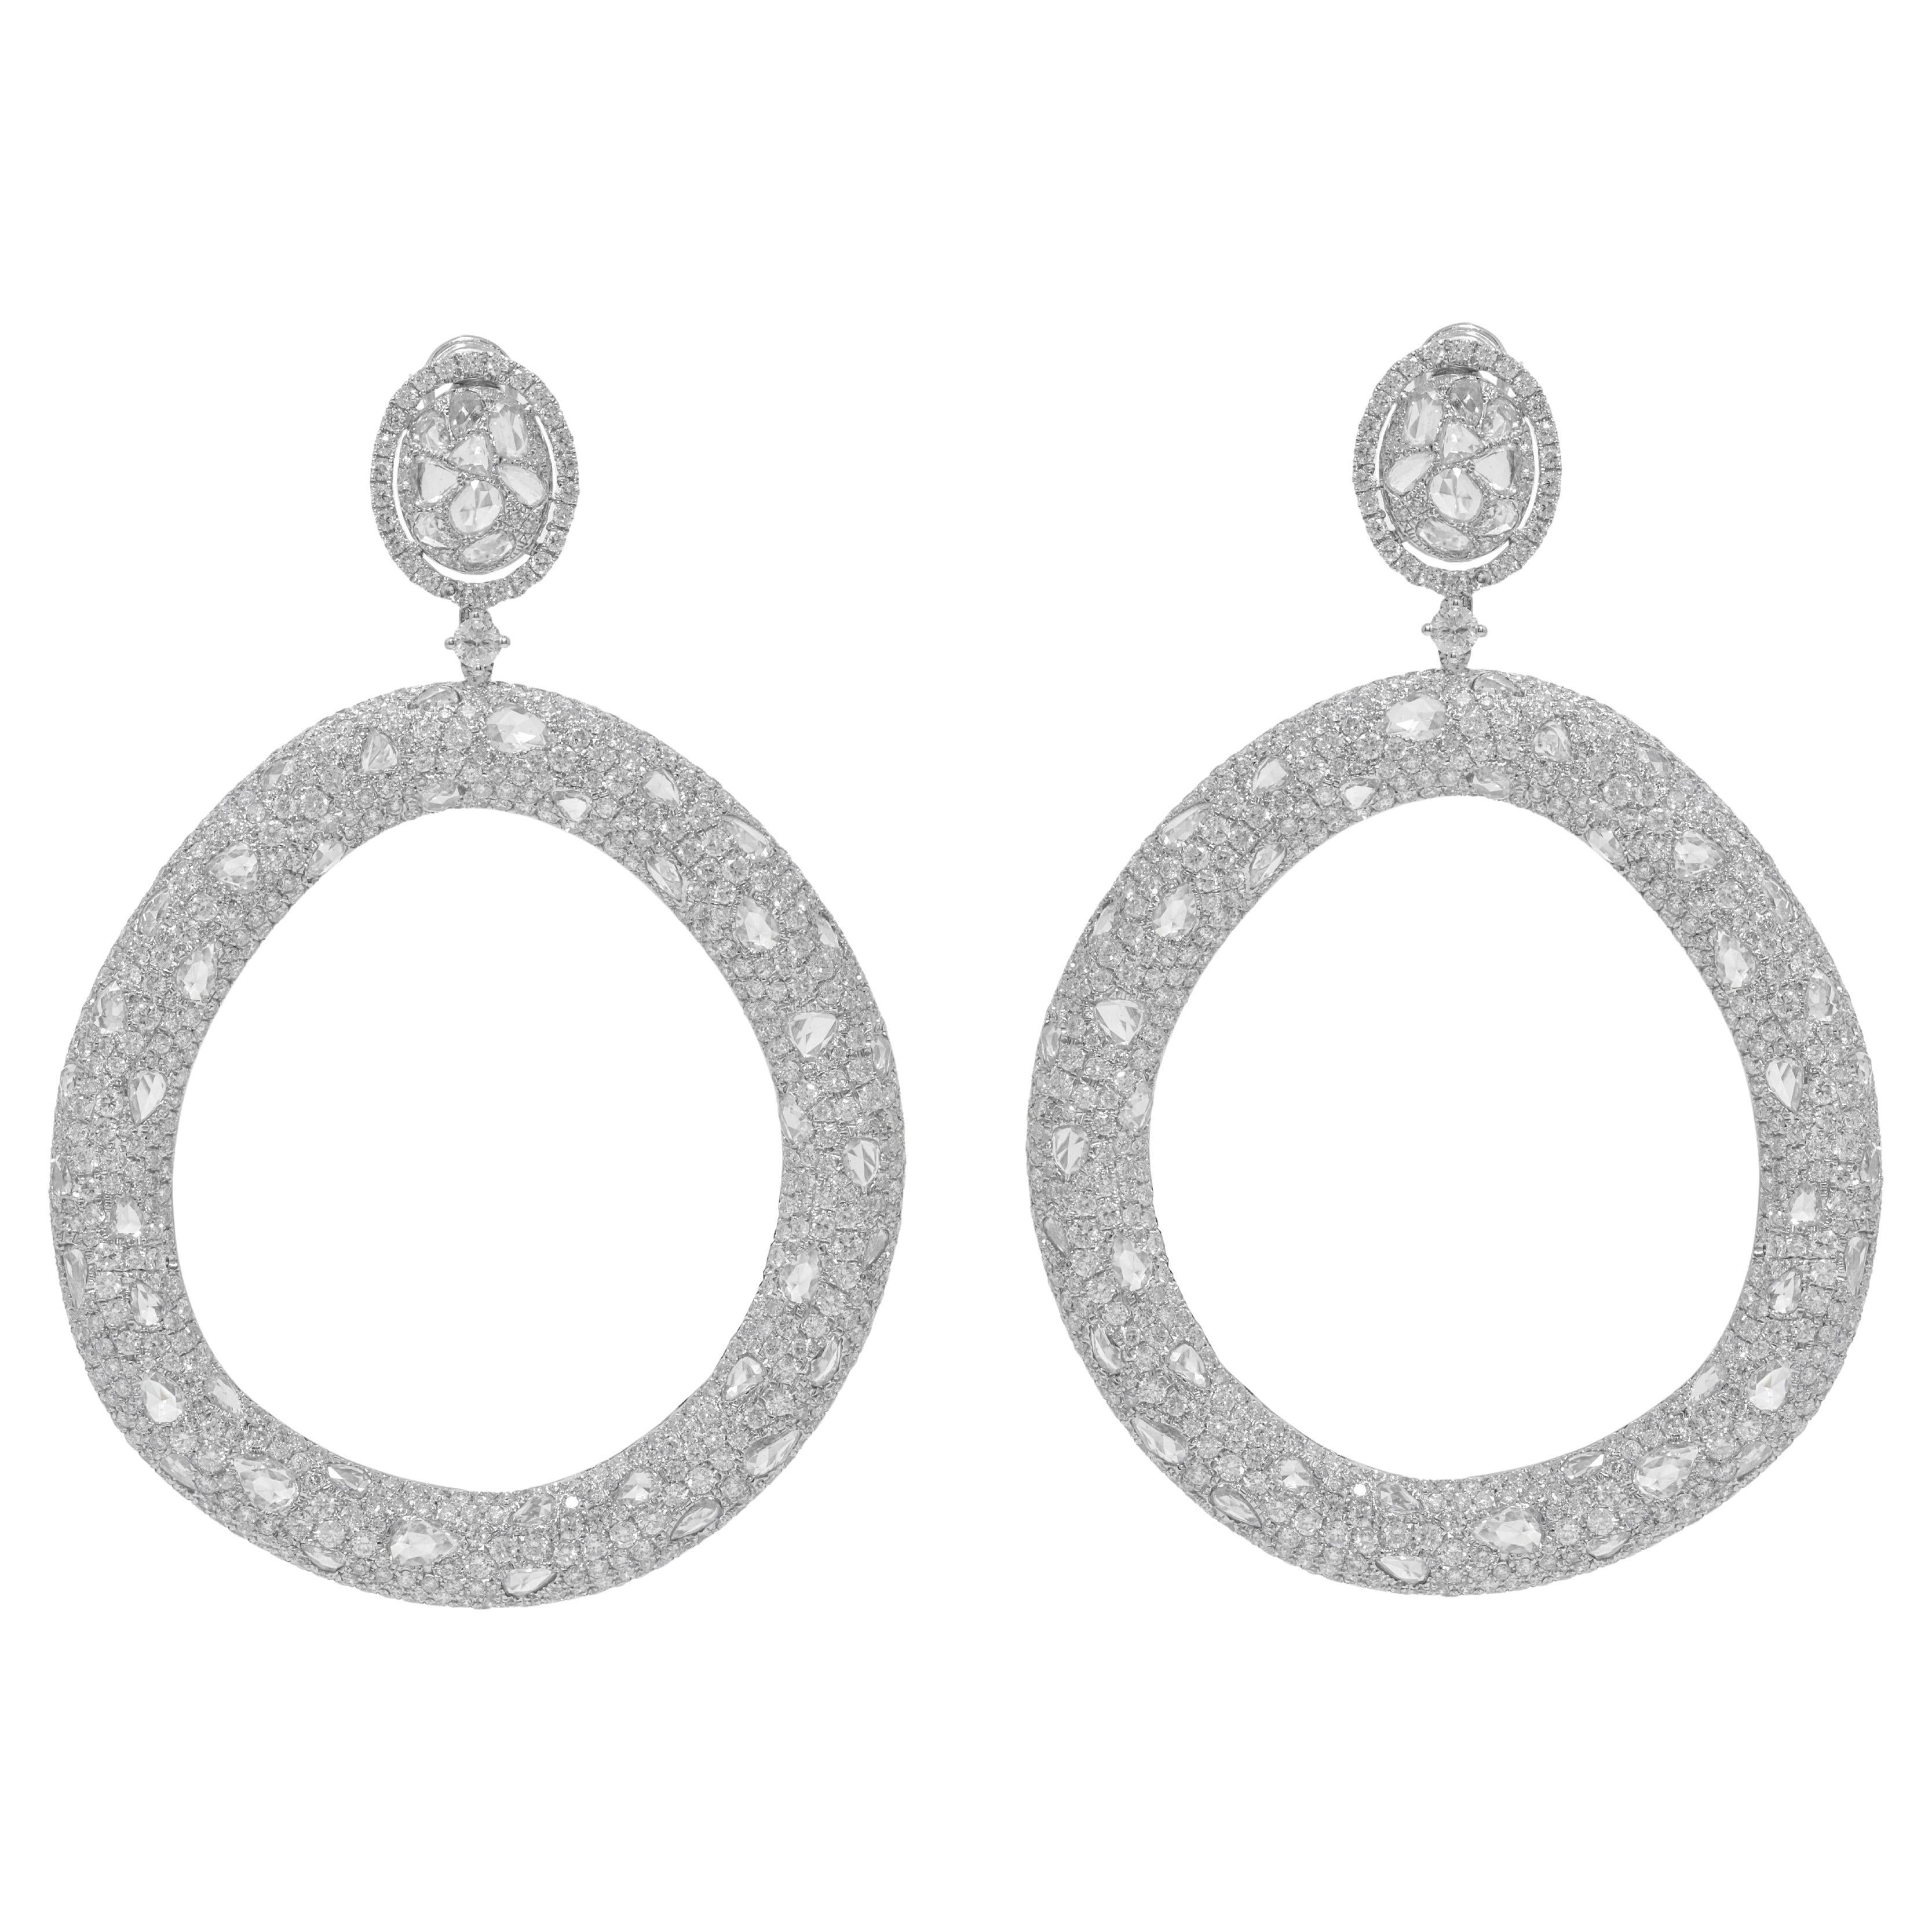 Diana M. 18 kt White Gold Bagel Shaped Fashion earrings adorned with 14.71 ct For Sale